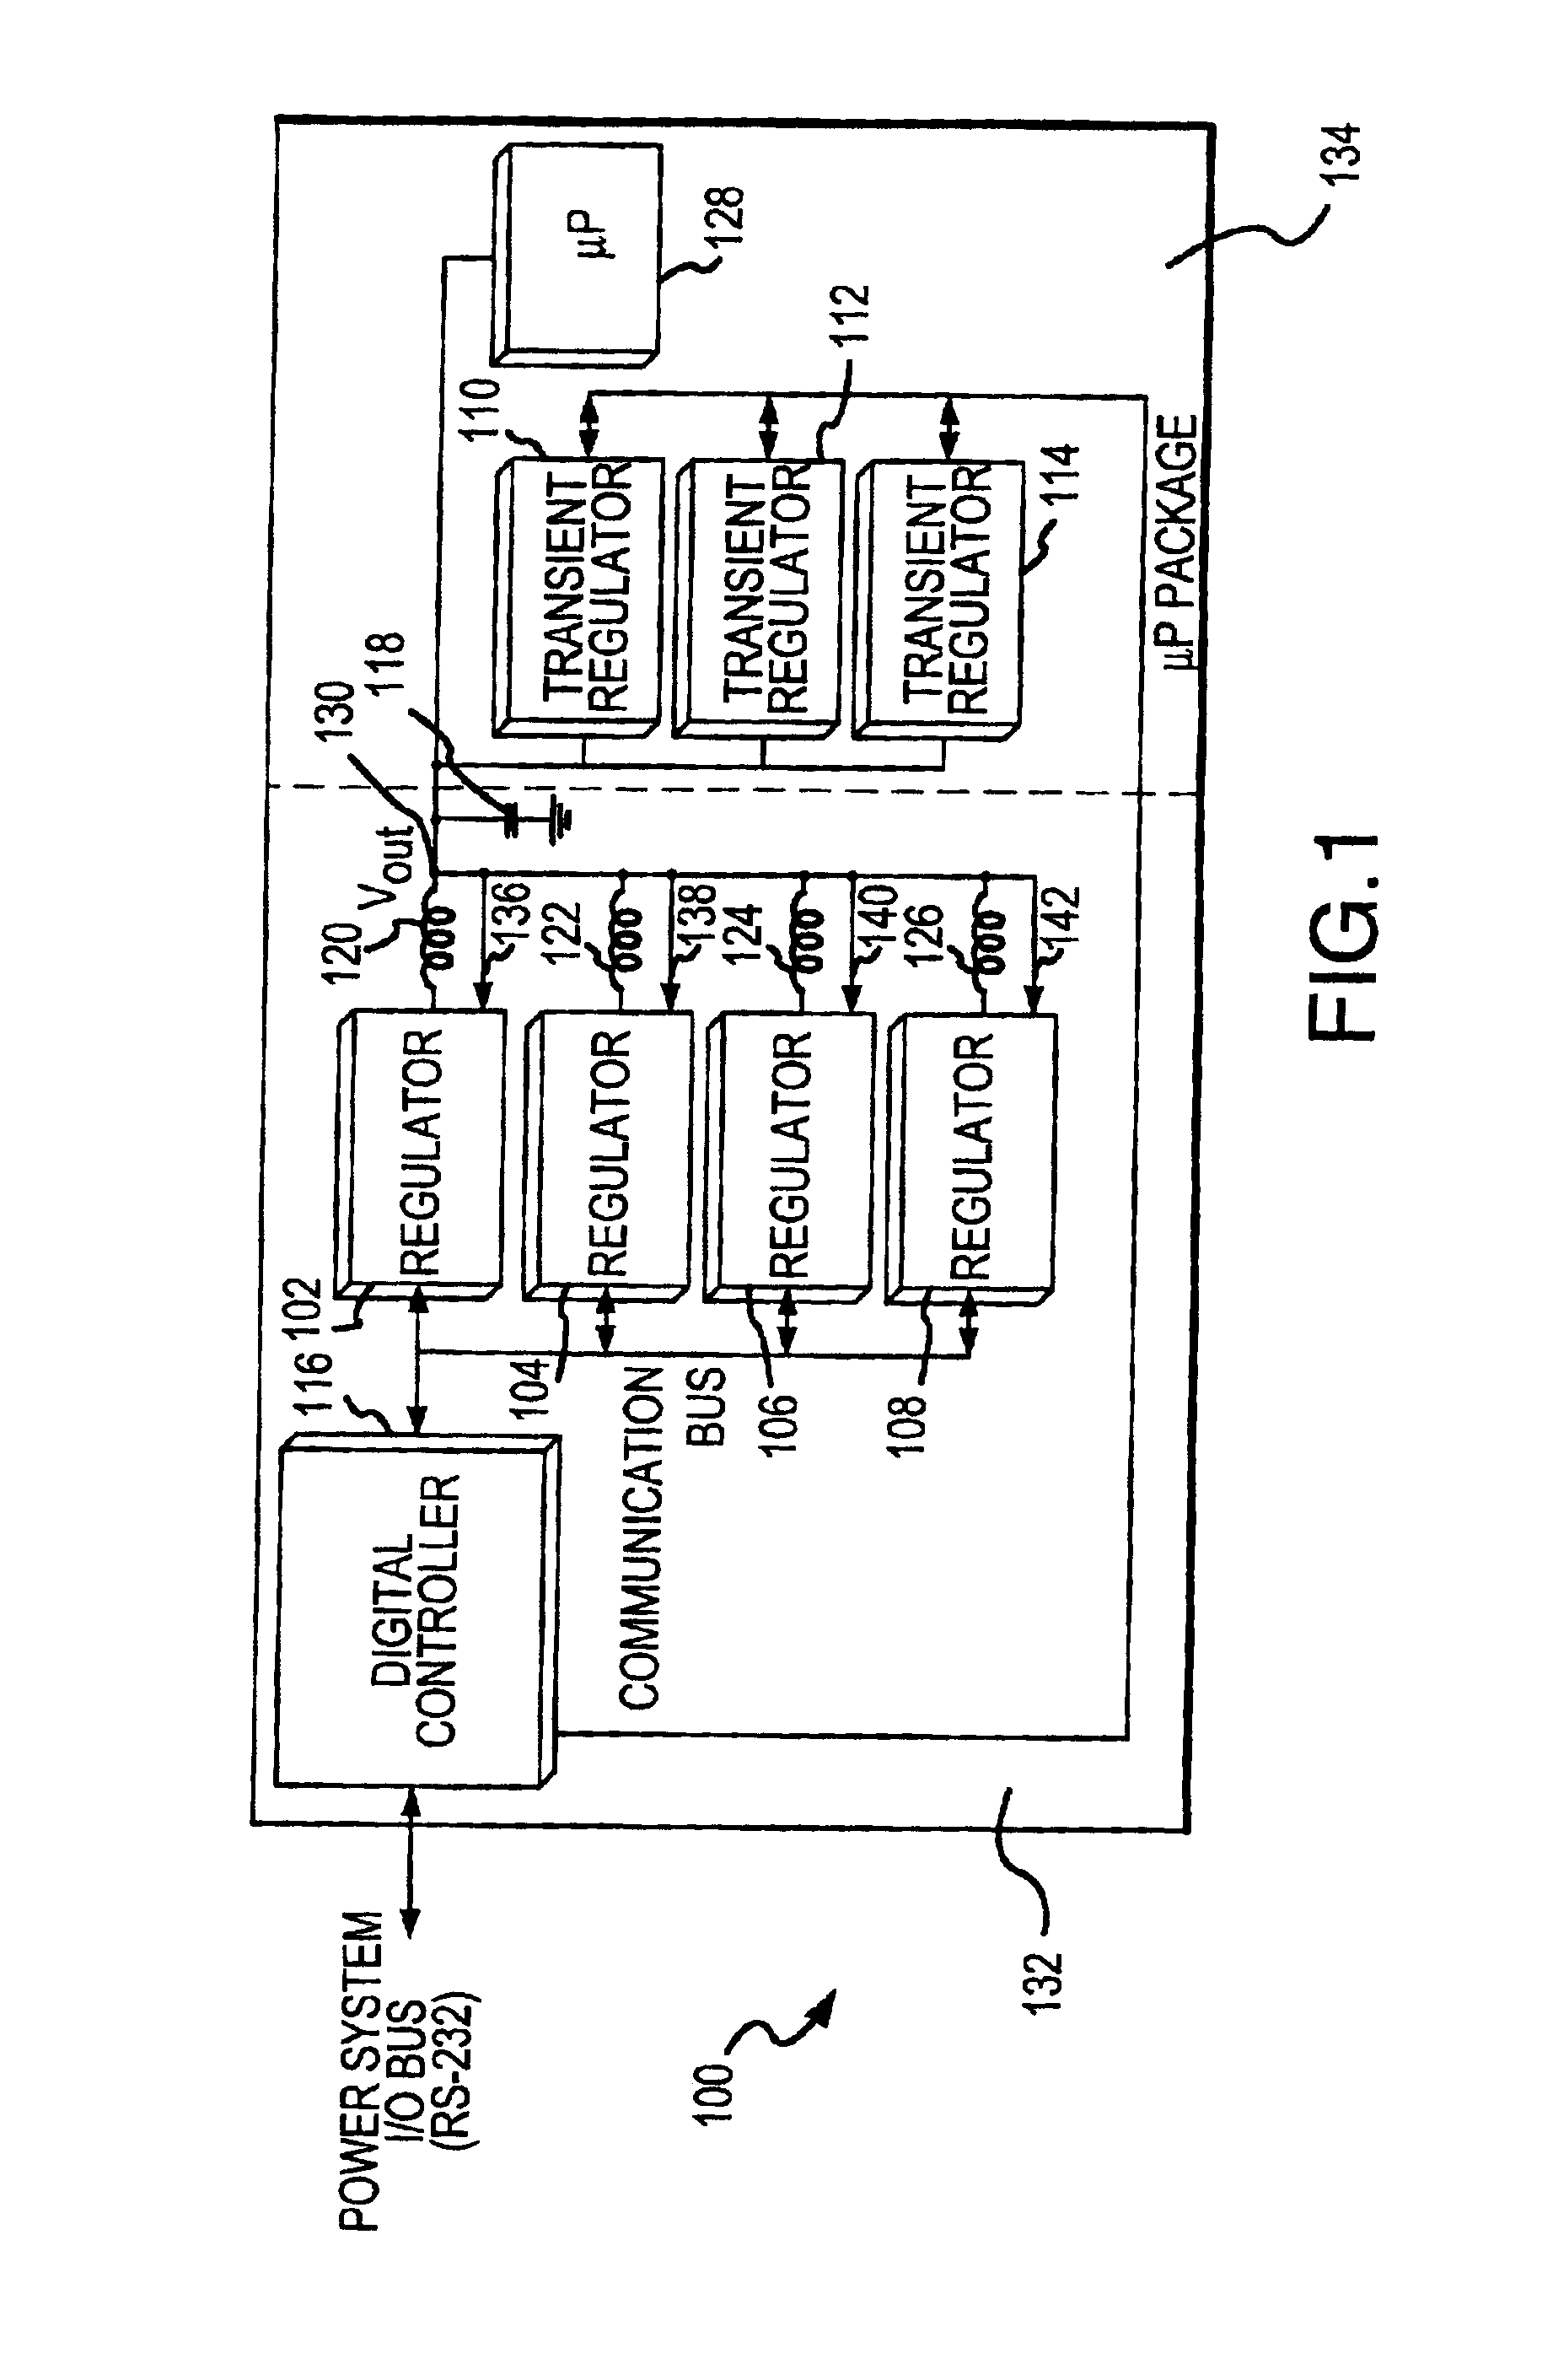 Serial bus control method and apparatus for a microelectronic power regulation system